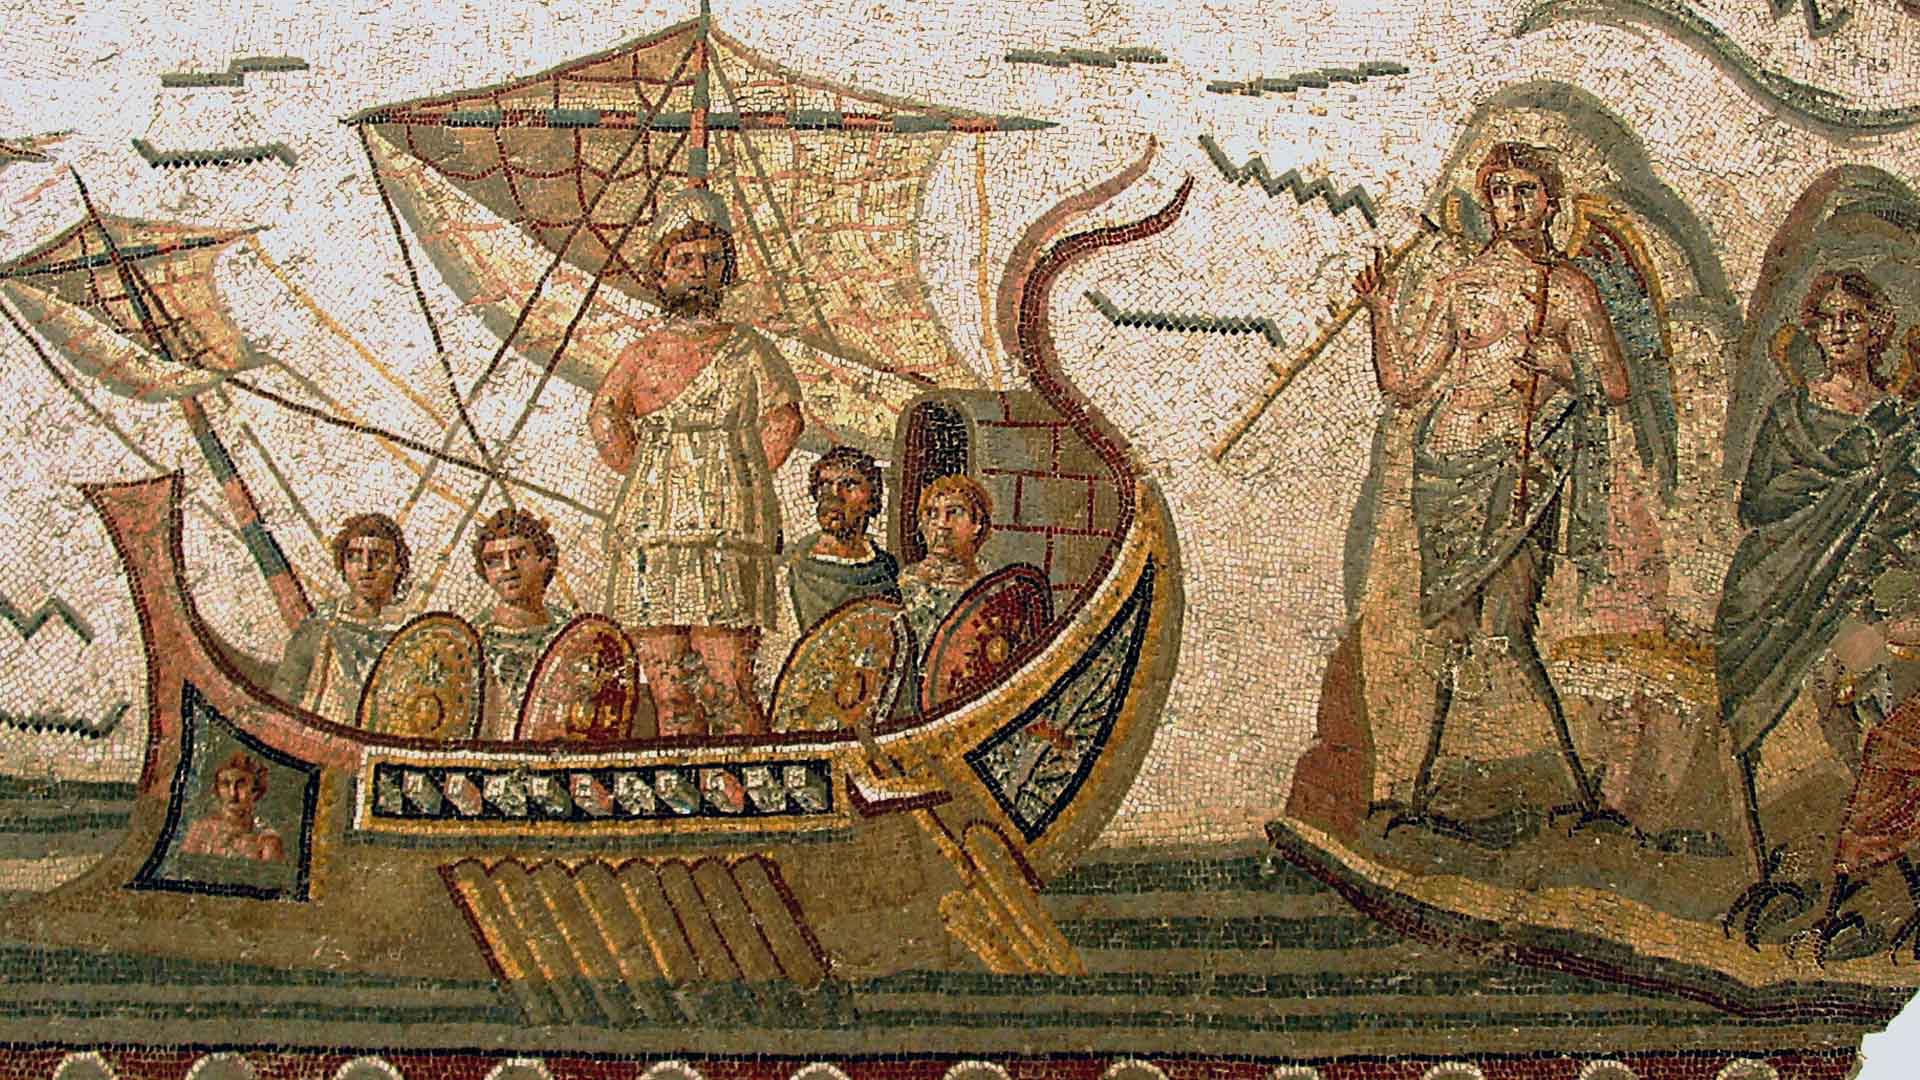 Odysseus attempts to sail home after victory in the Trojan War